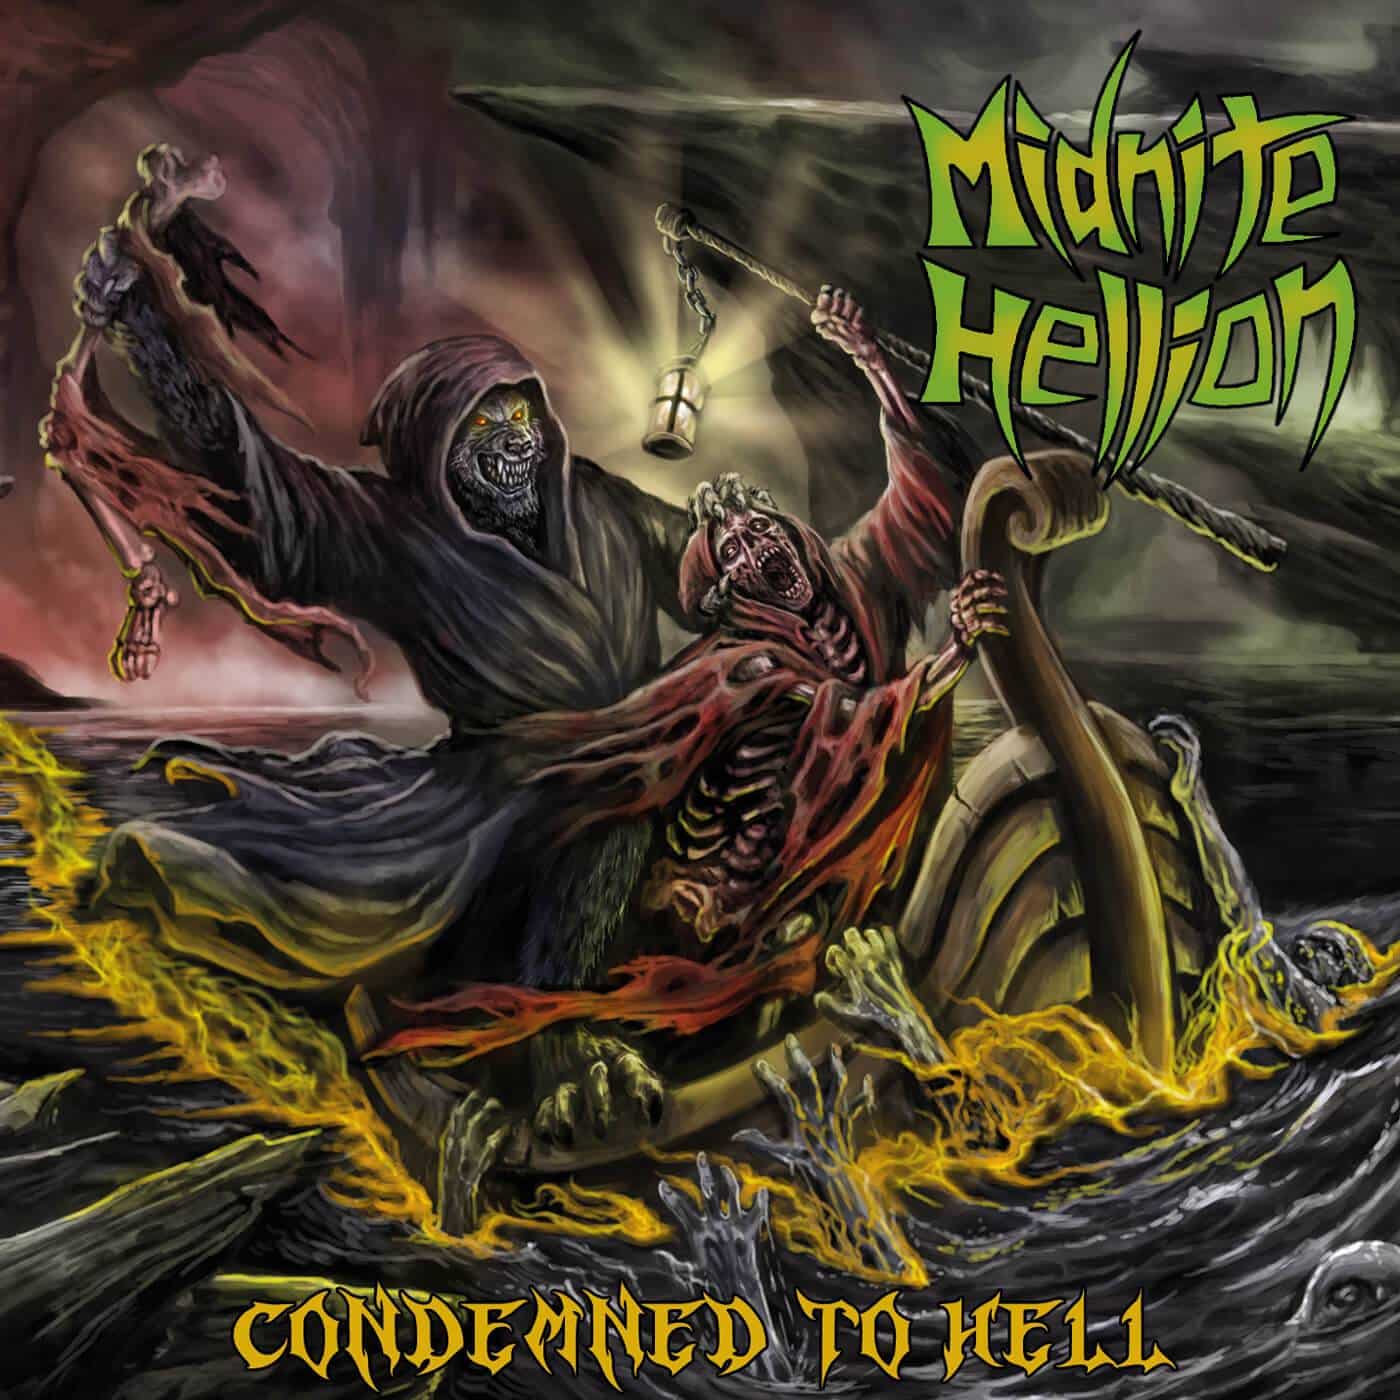 Midnite Hellion : "Condemned to Hell" CD 15th September 2017 Witches Brew records.